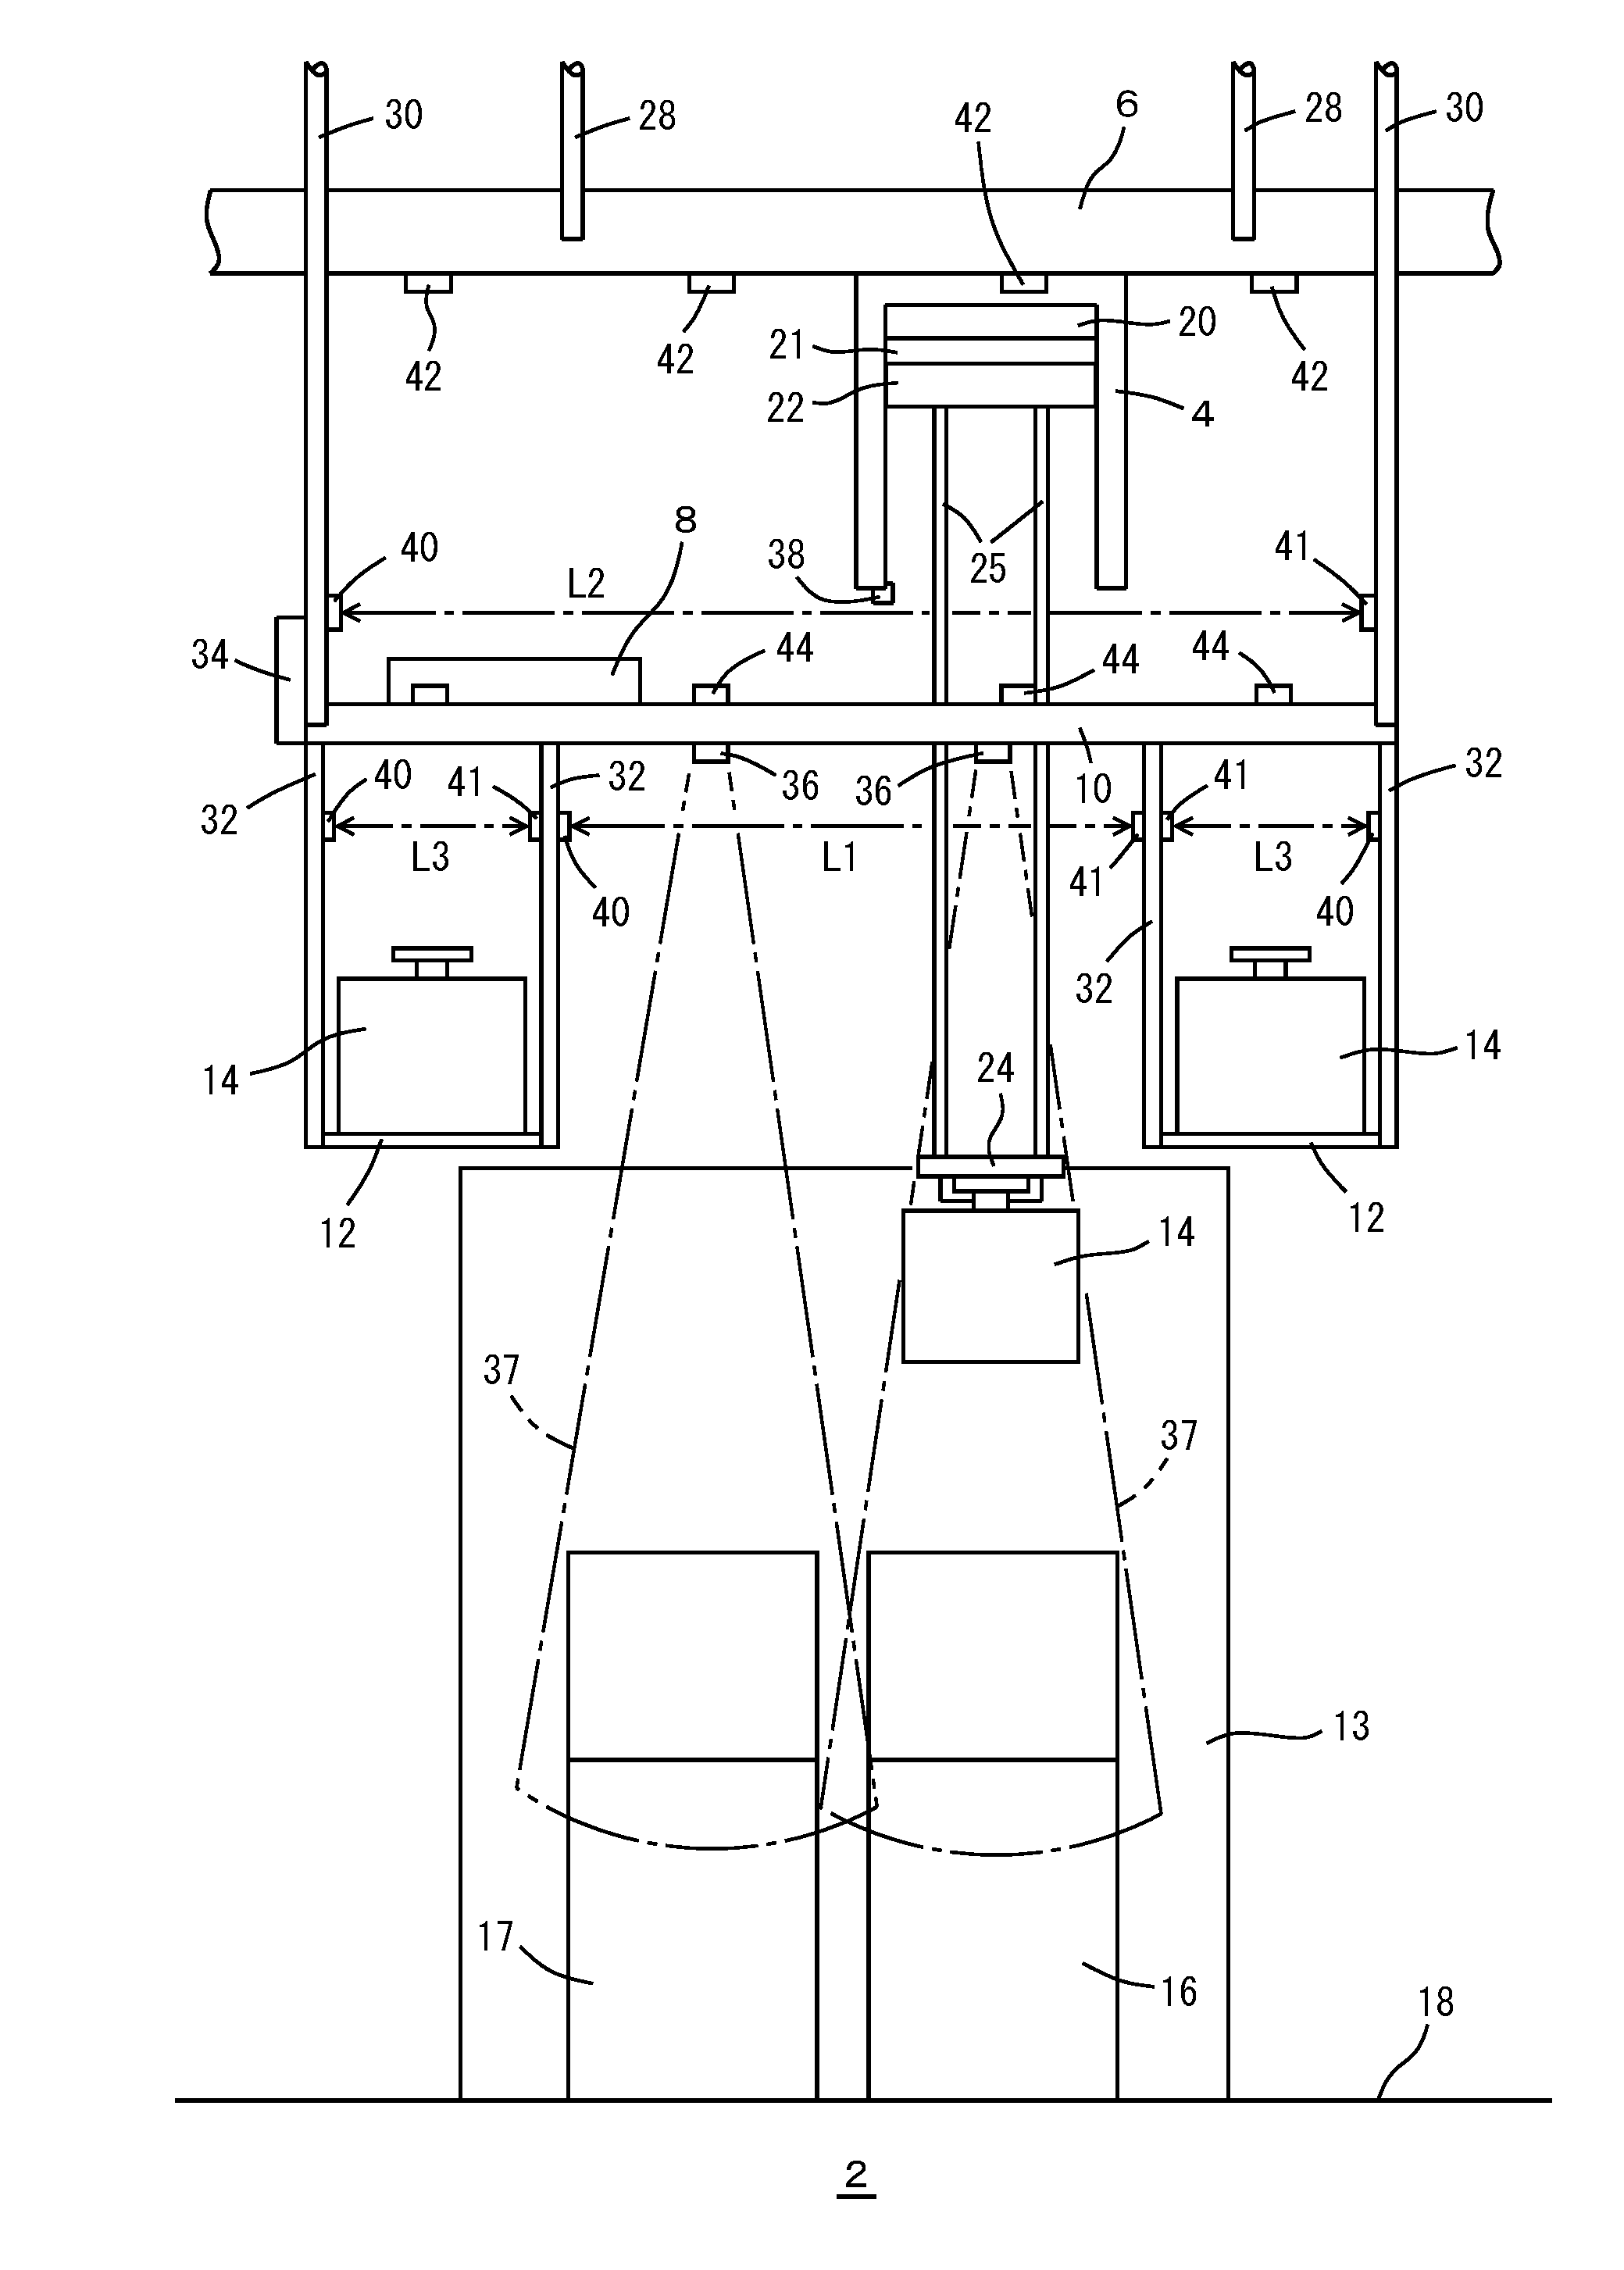 Overhead traveling vehicle system and control method for overhead traveling vehicle system